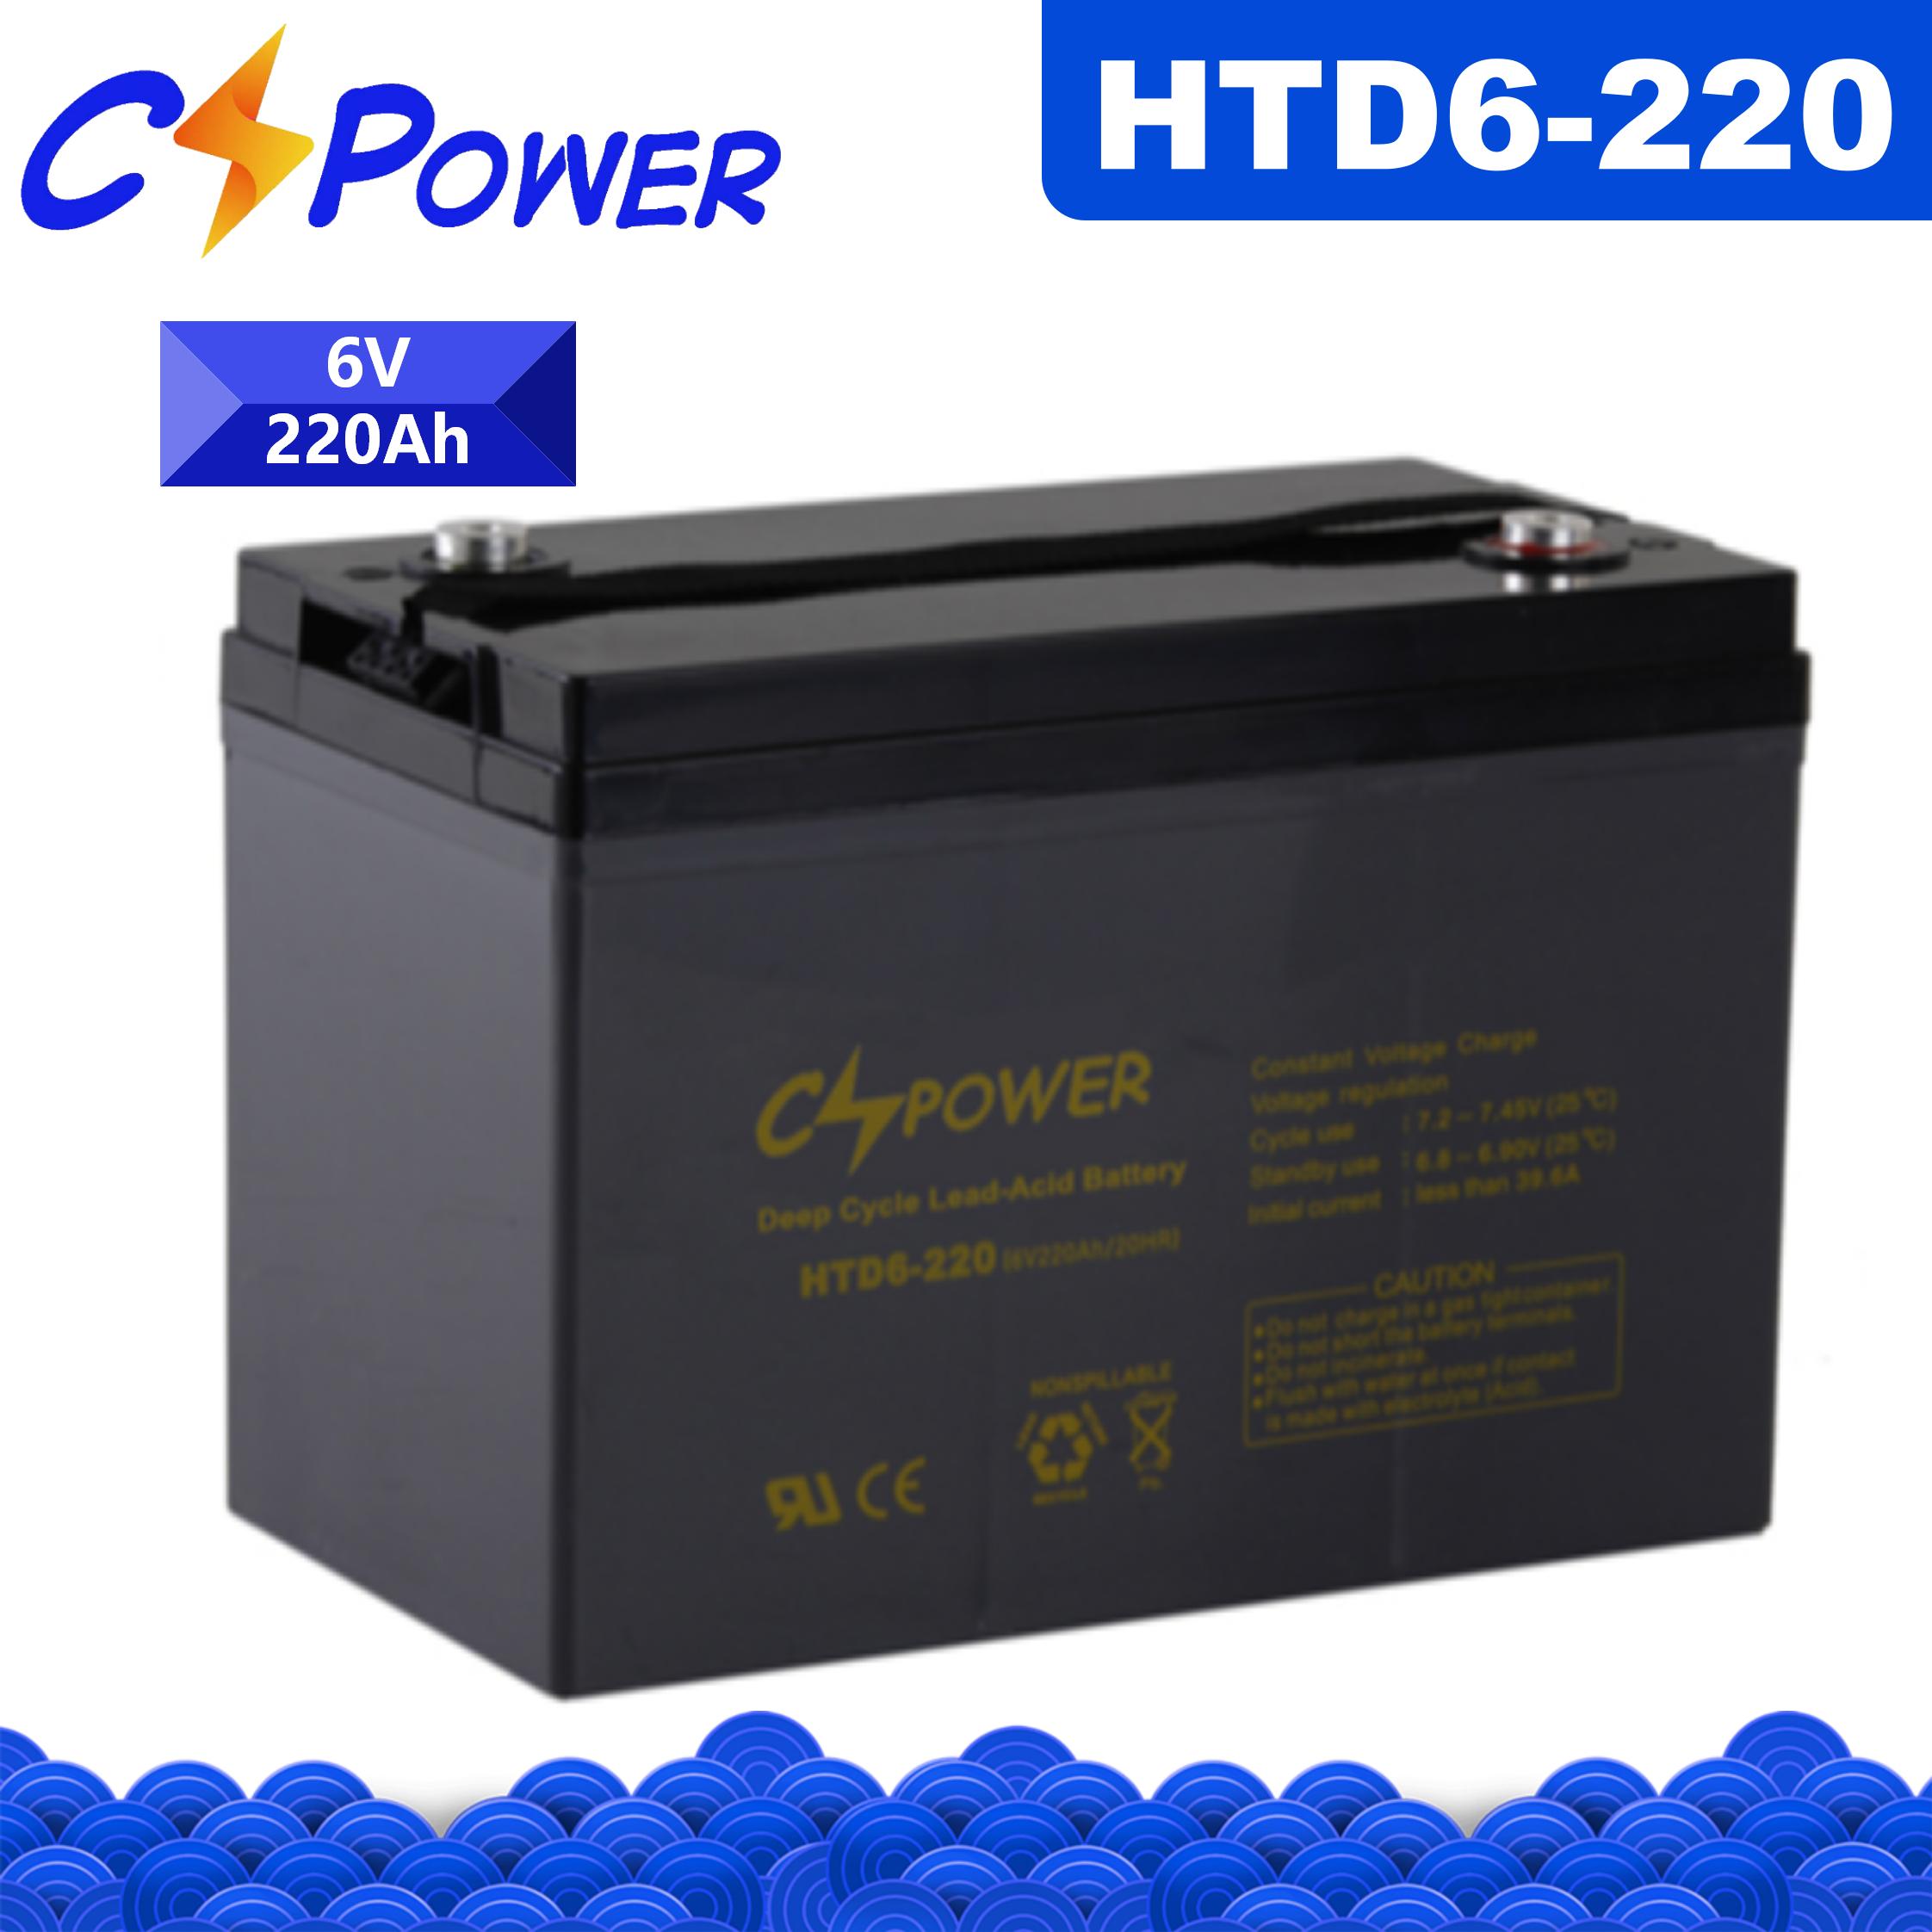 CSPower HTD6-220 Deep Cycle VRLA AGM Battery